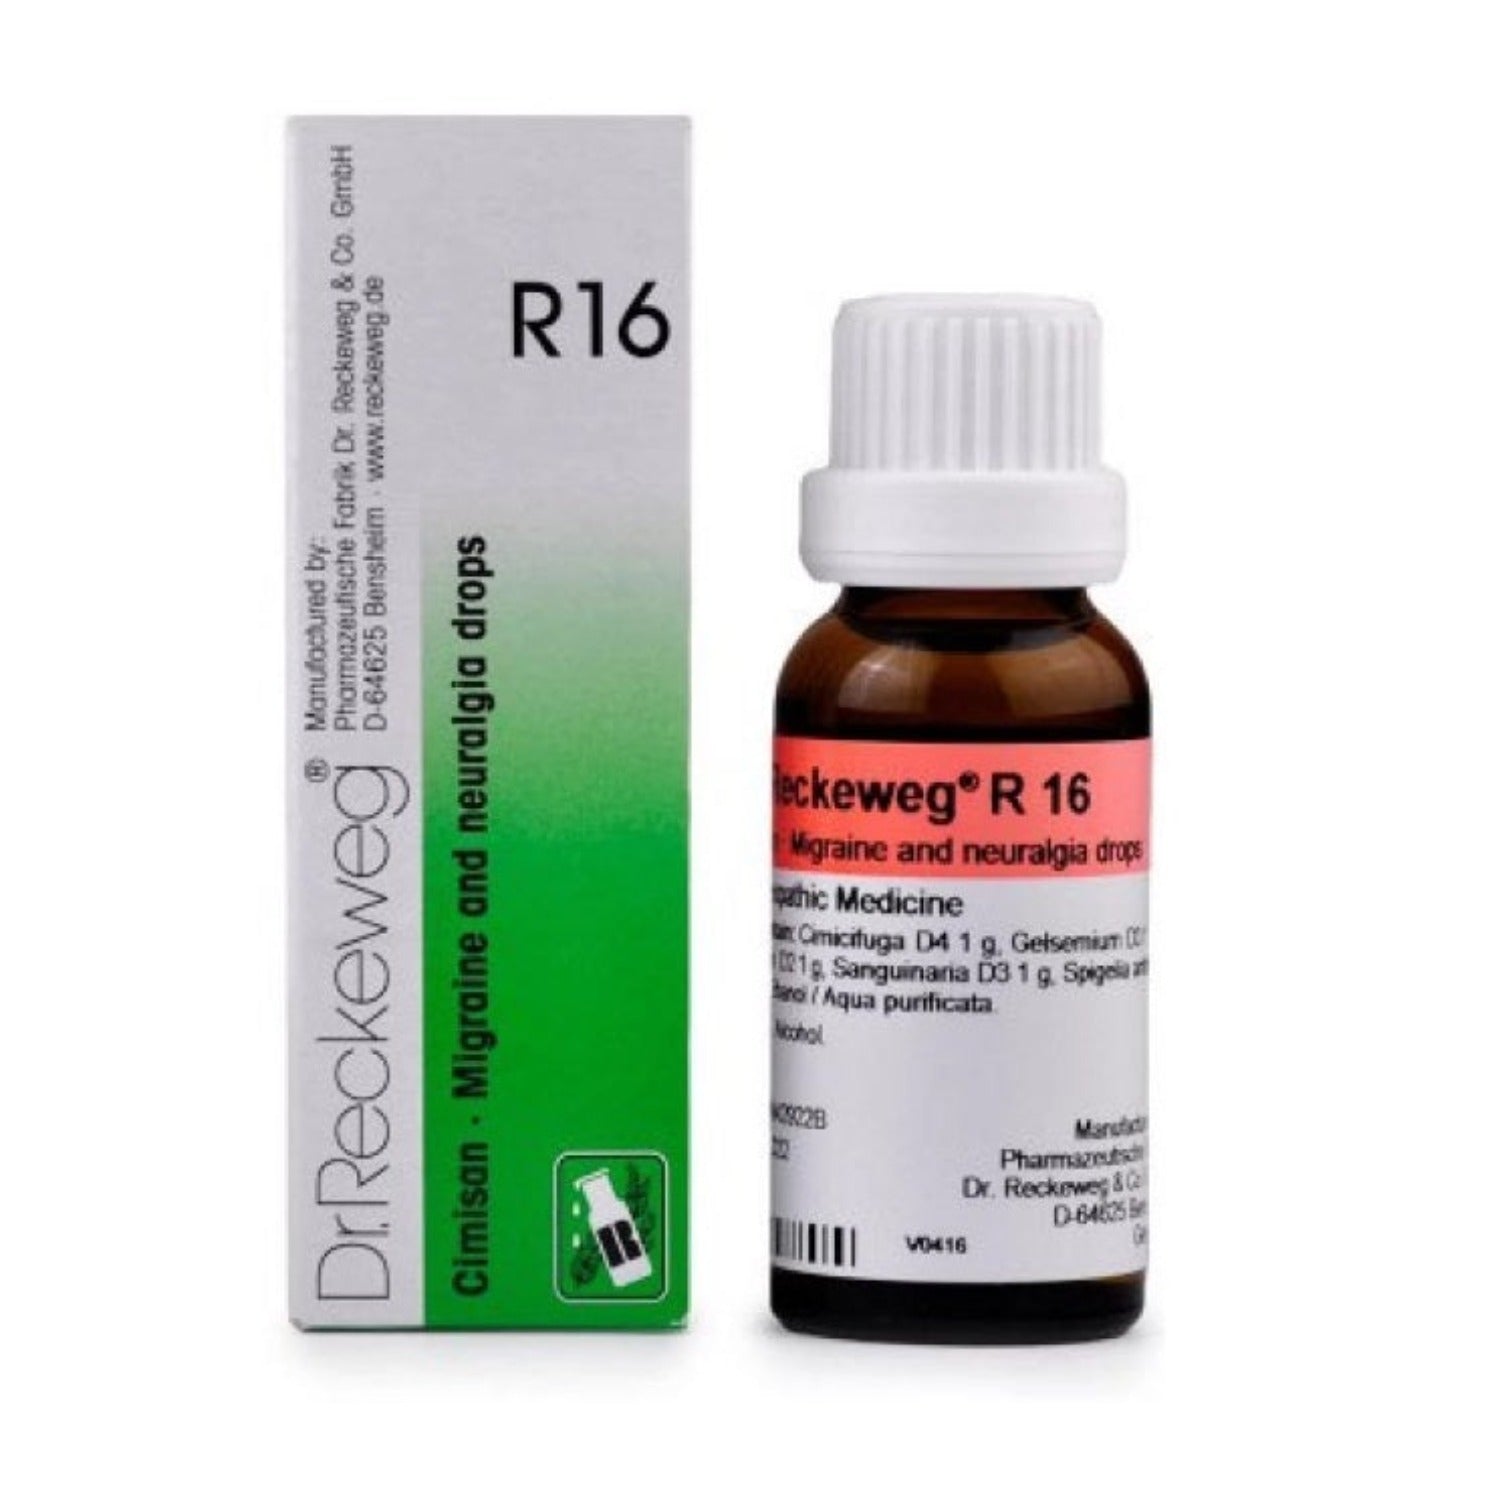 Dr Reckeweg Homoeopathy R16 Migraine and Neuralgia Drops 22 ml